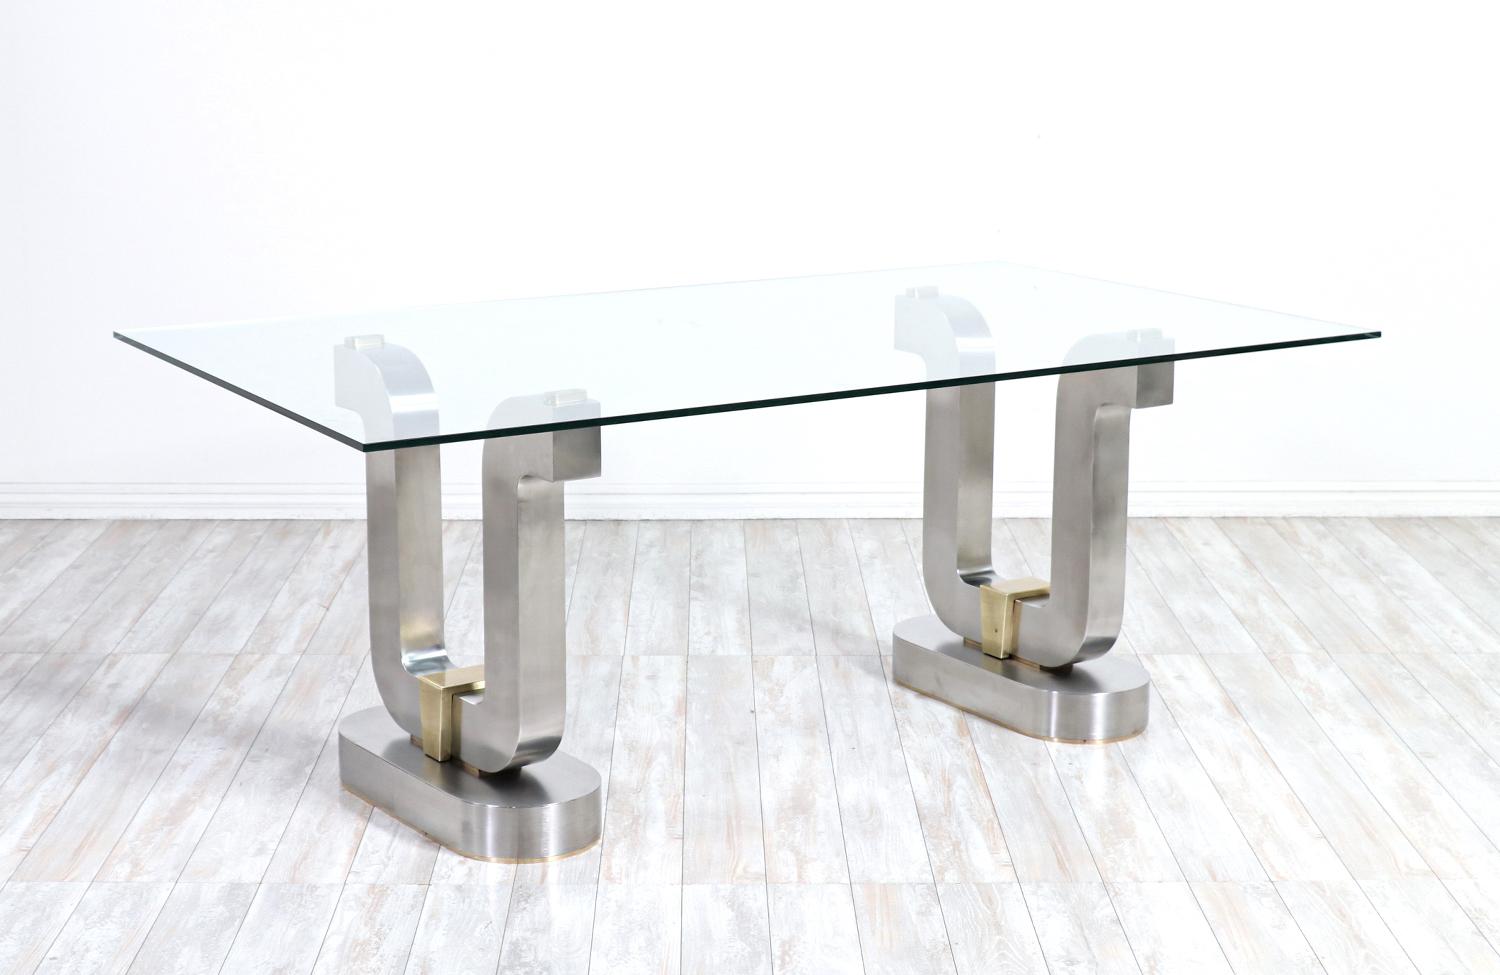 Mid-Century Modern sculpted metal dining table with glass top.

________________________________________

Transforming a piece of Mid-Century Modern furniture is like bringing history back to life, and we take this journey with passion and